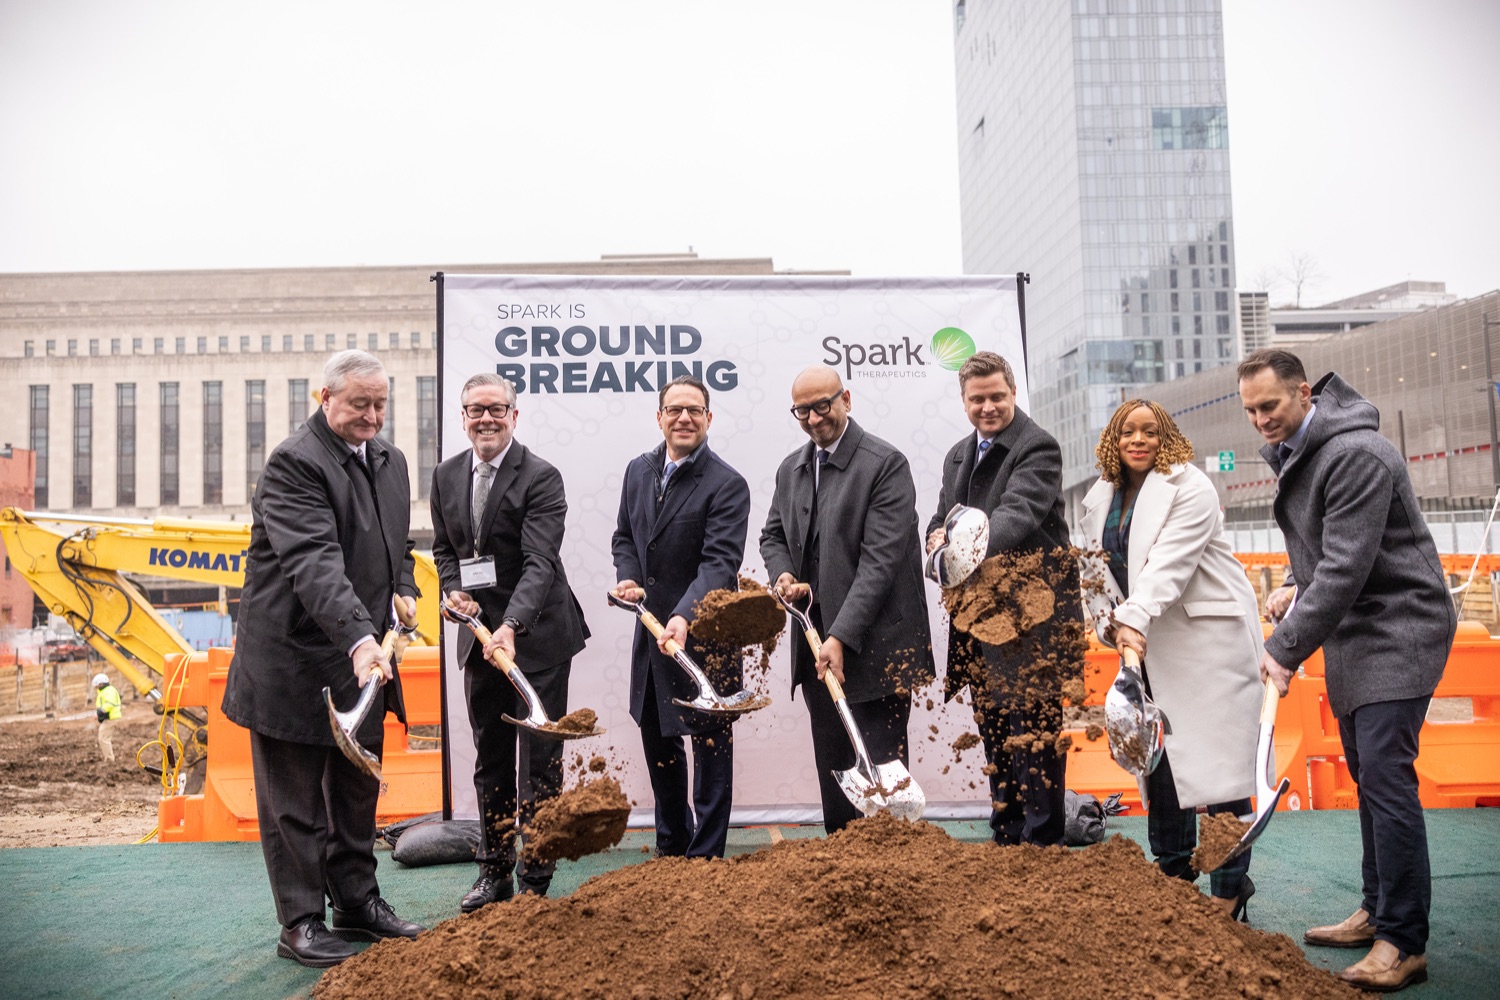 Pennsylvania Governor Josh Shapiro participates in a groundbreaking for Spark Therapeutics at the future site of their new building, at 30th and Chestnut streets.  FEBRUARY 28, 2023 - PHILADELPHIA, PA<br><a href="https://filesource.amperwave.net/commonwealthofpa/photo/22728_gov_spark_dz_0015.JPG" target="_blank">⇣ Download Photo</a>